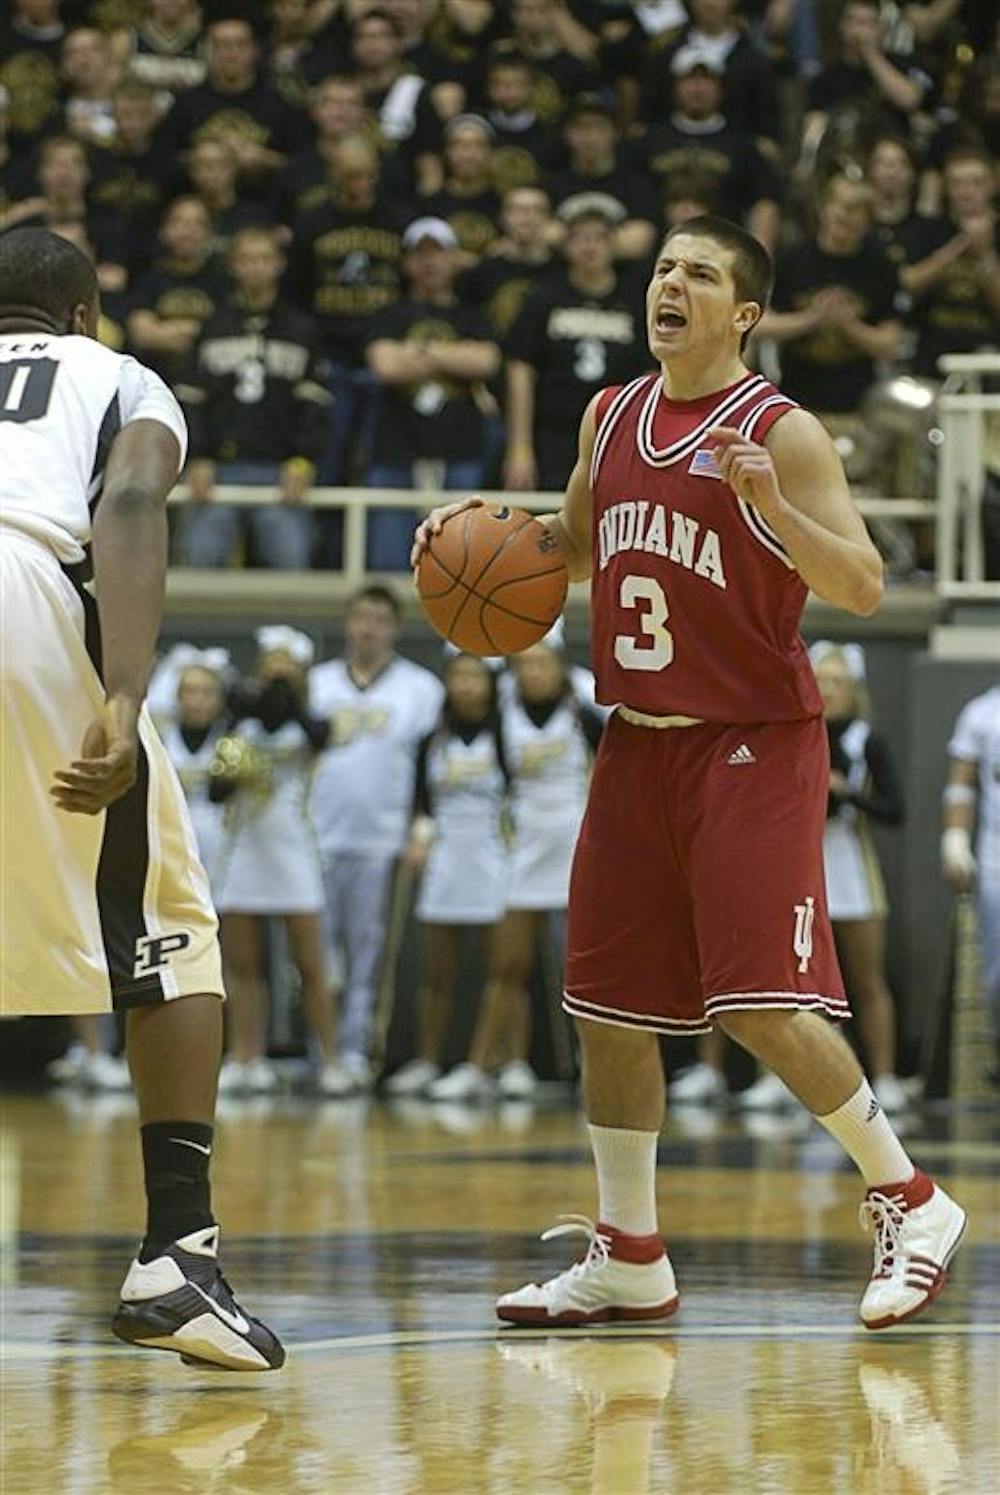 IU point guard Daniel Moore directs the Hoosier offense in the first half of Saturday's loss at Purdue. Moore played just five minutes with no points scored.